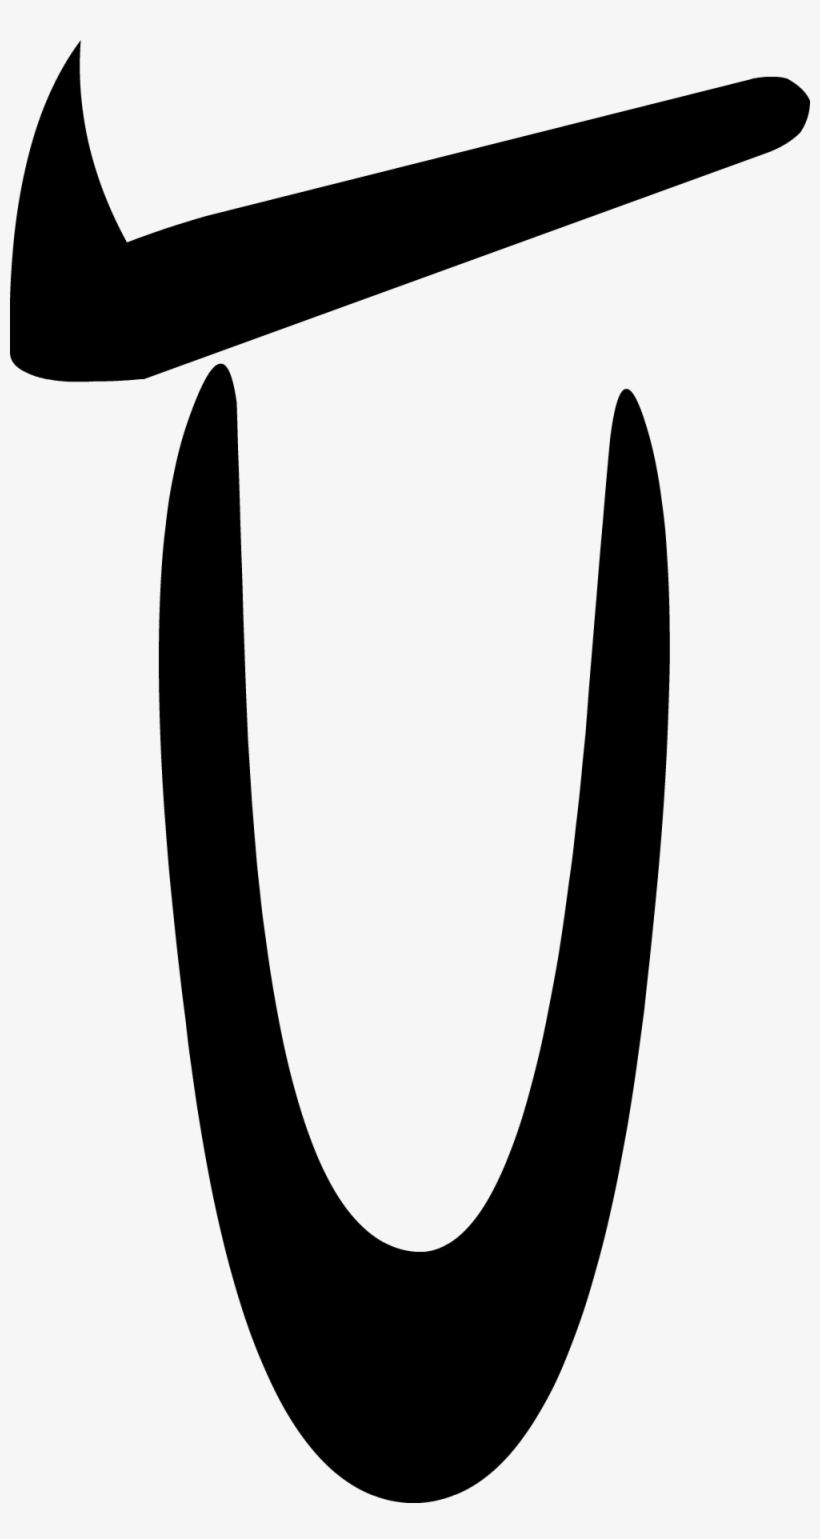 Bfdi Angry Eye Closed - Bfdi Angry Eye, transparent png #1795293